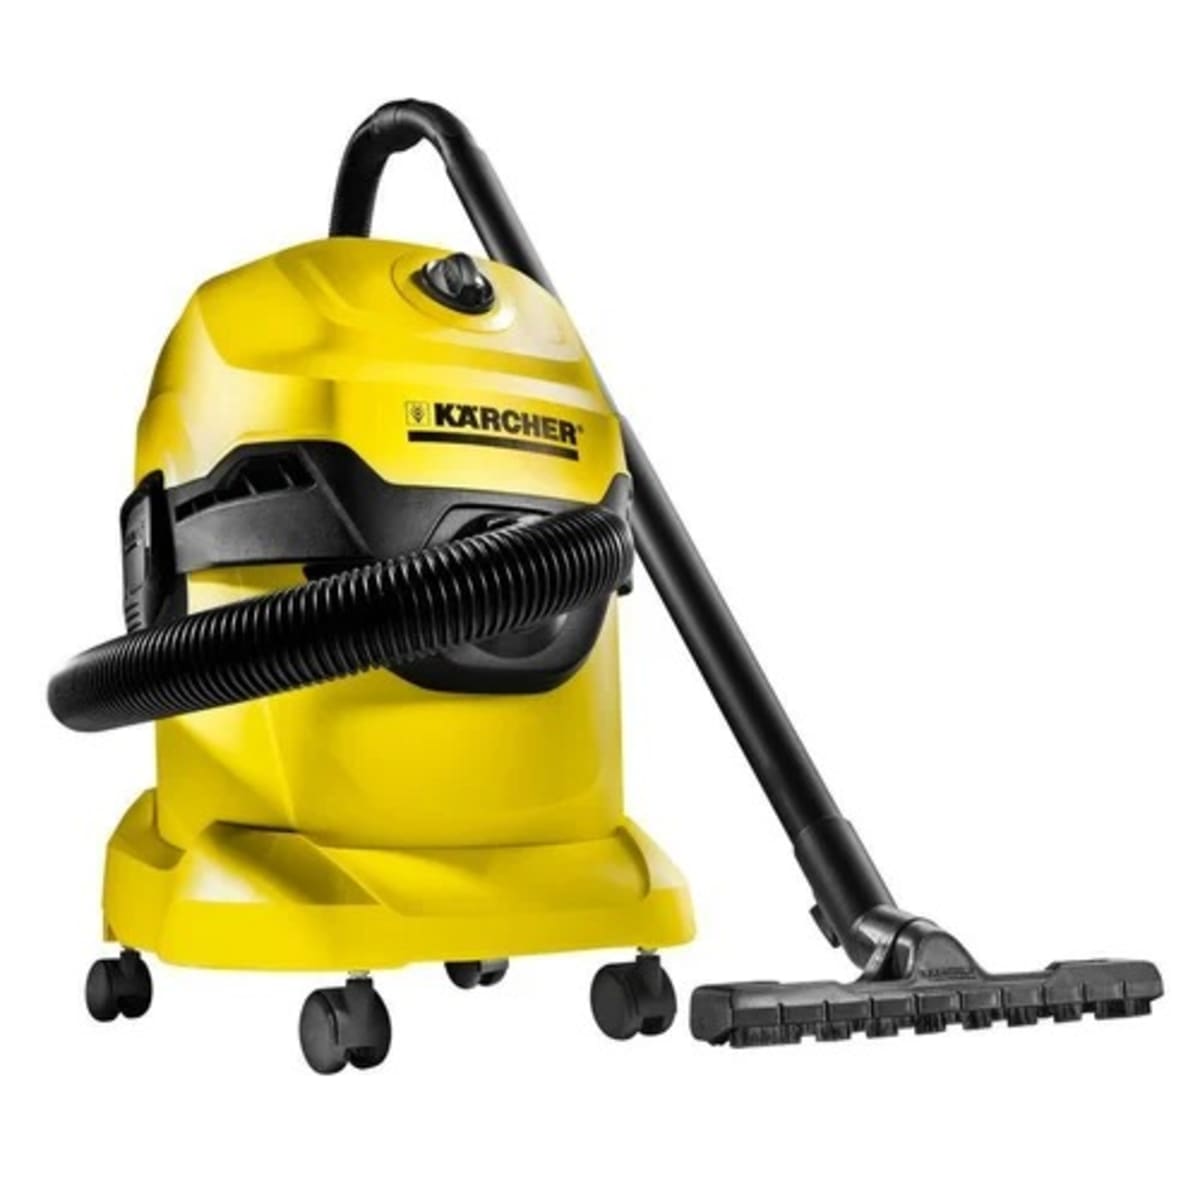 Karcher Wd 2 Wet And Dry Vacuum Cleaner - 1000w